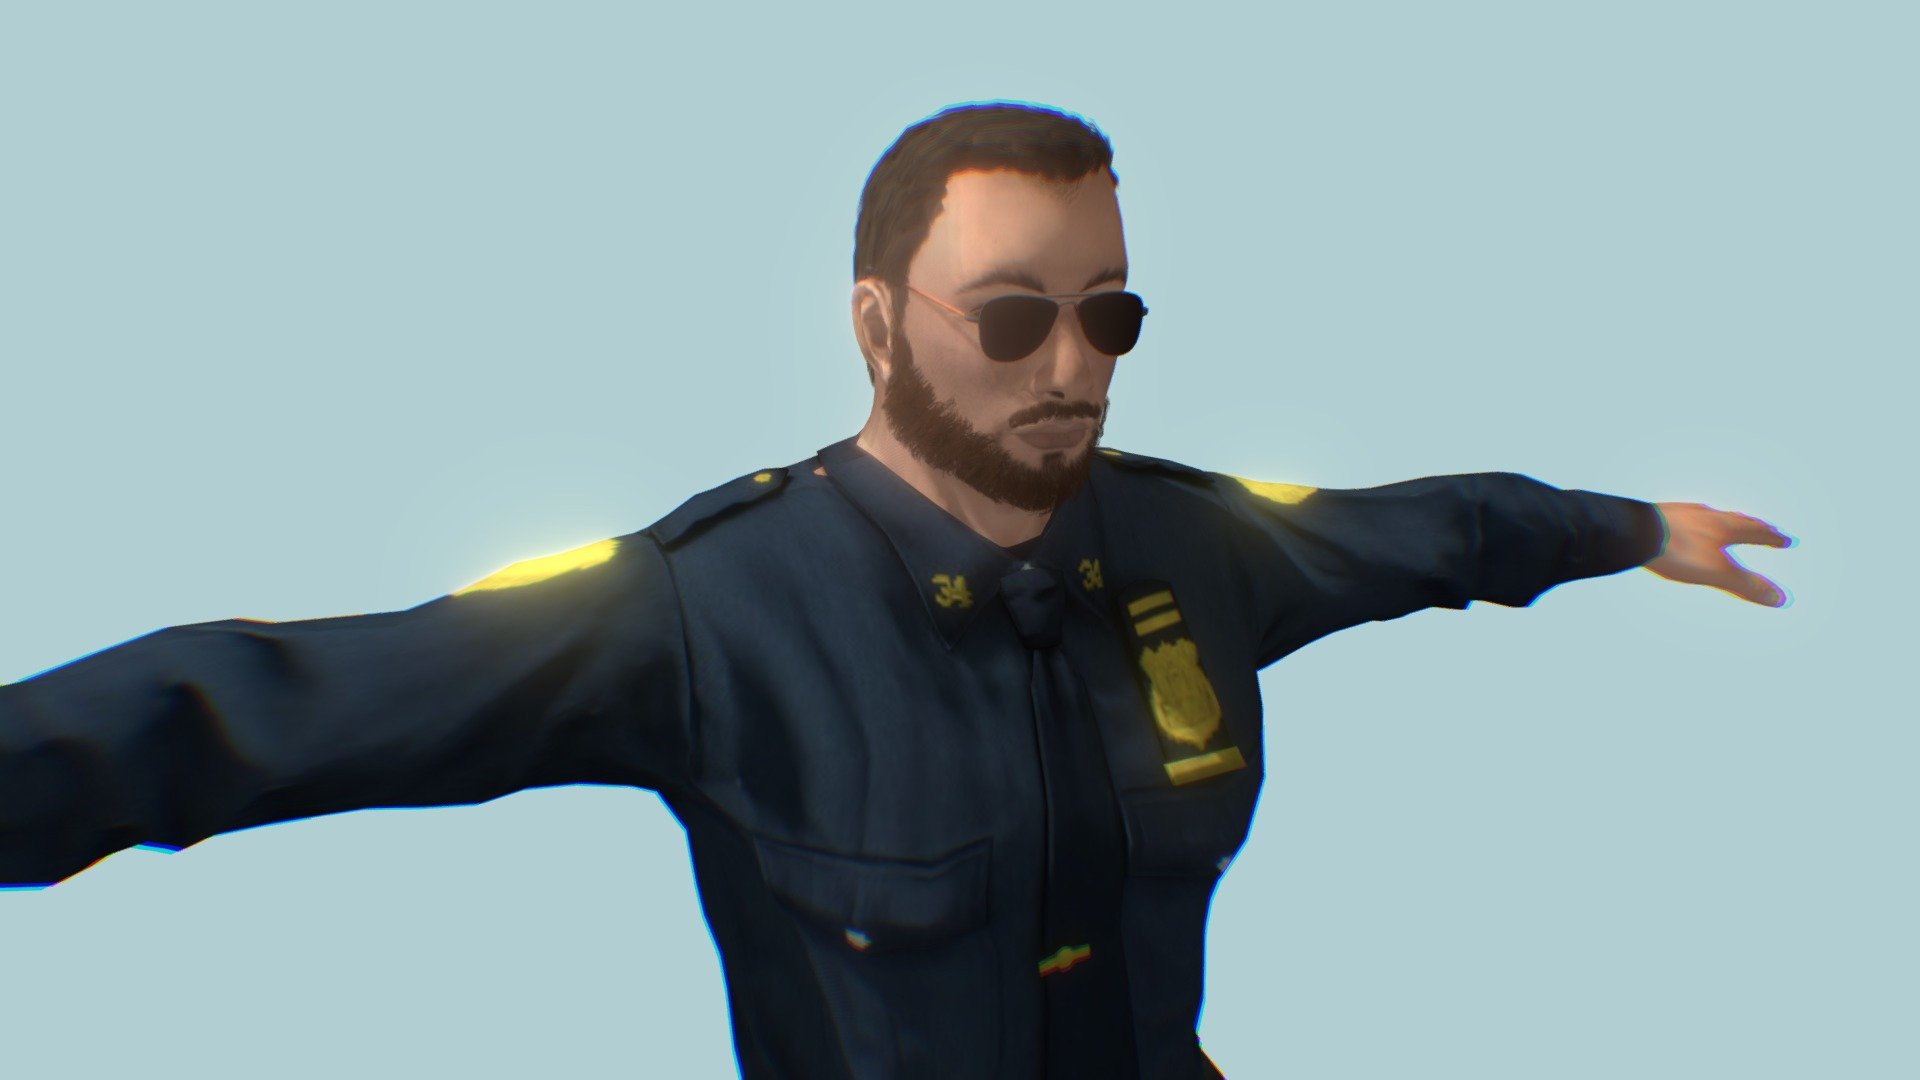 A police officer model for free - Police With Sun Glasses - Download Free 3D model by SAM - IE (@itsnarutofan) 3d model